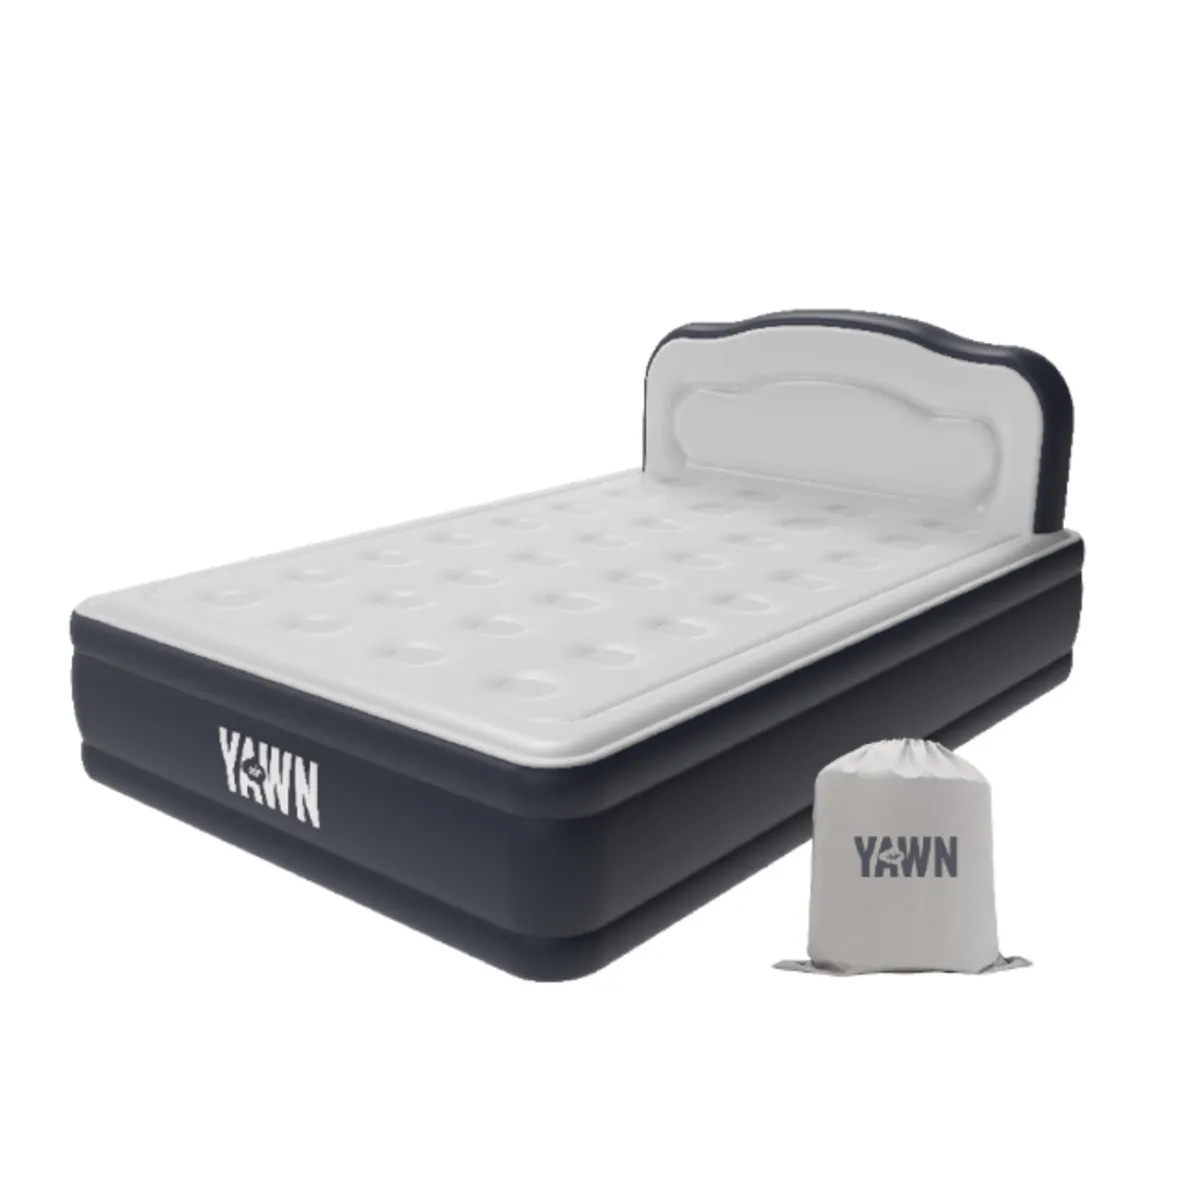 Self Inflating Yawn double Air bed